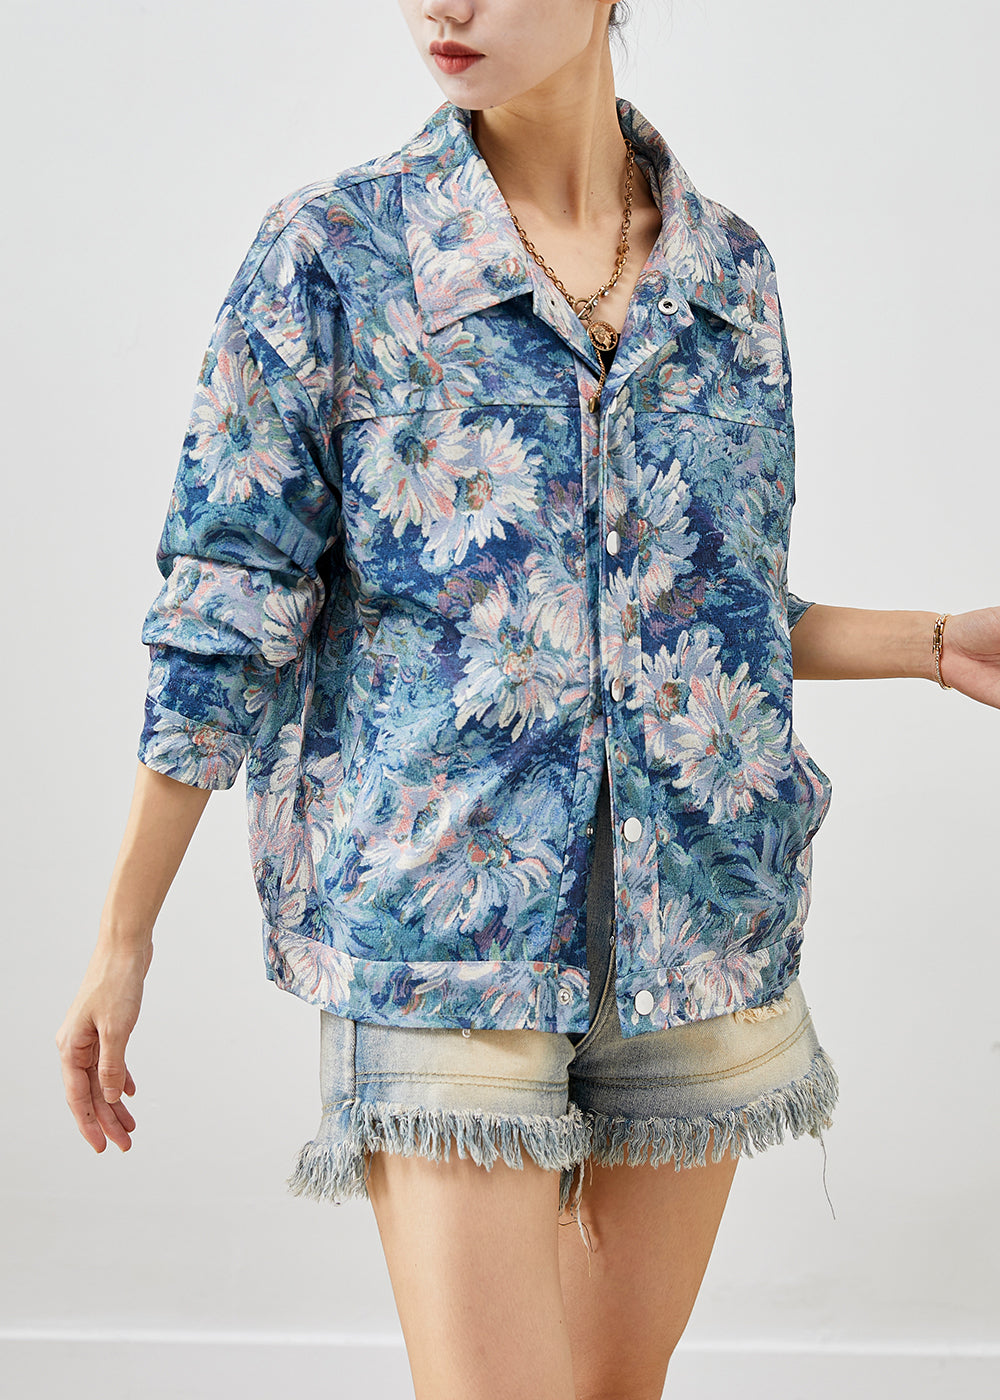 Stylish Blue Floral Painting Cotton Coat Outwear Fall Ada Fashion